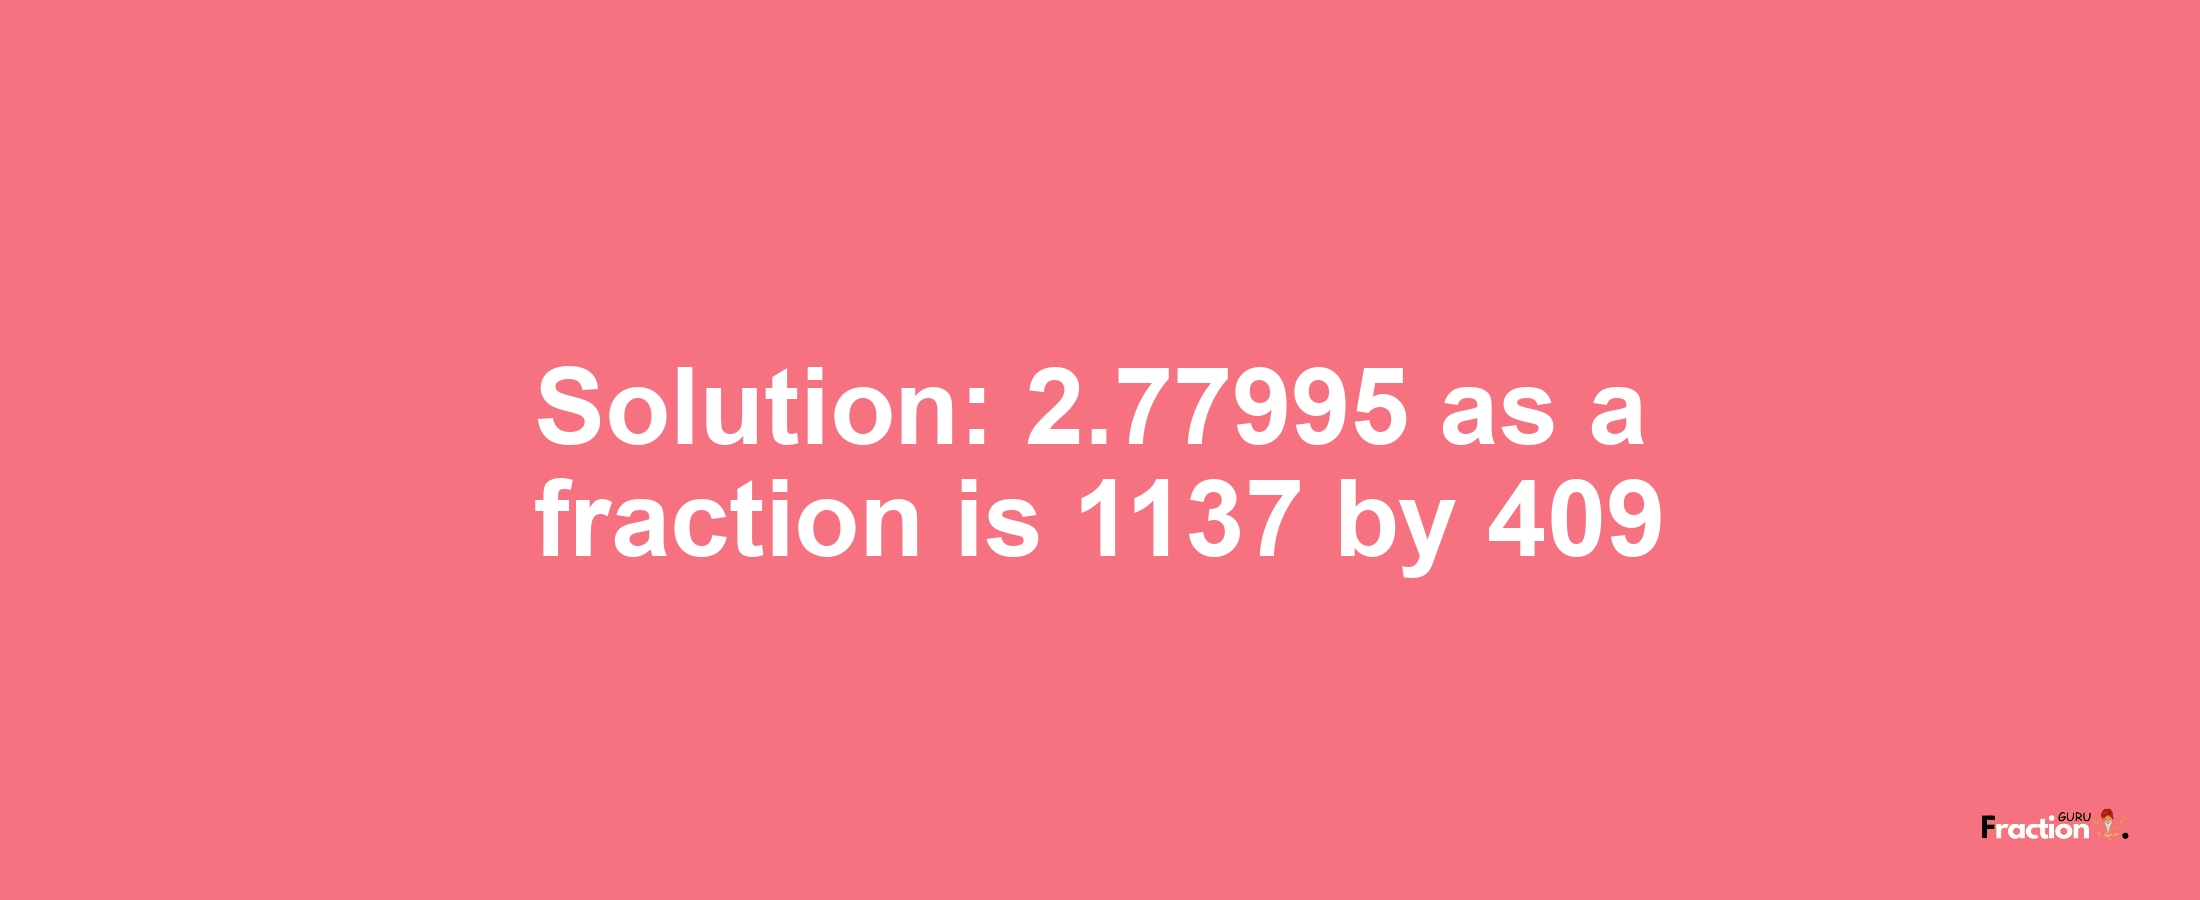 Solution:2.77995 as a fraction is 1137/409